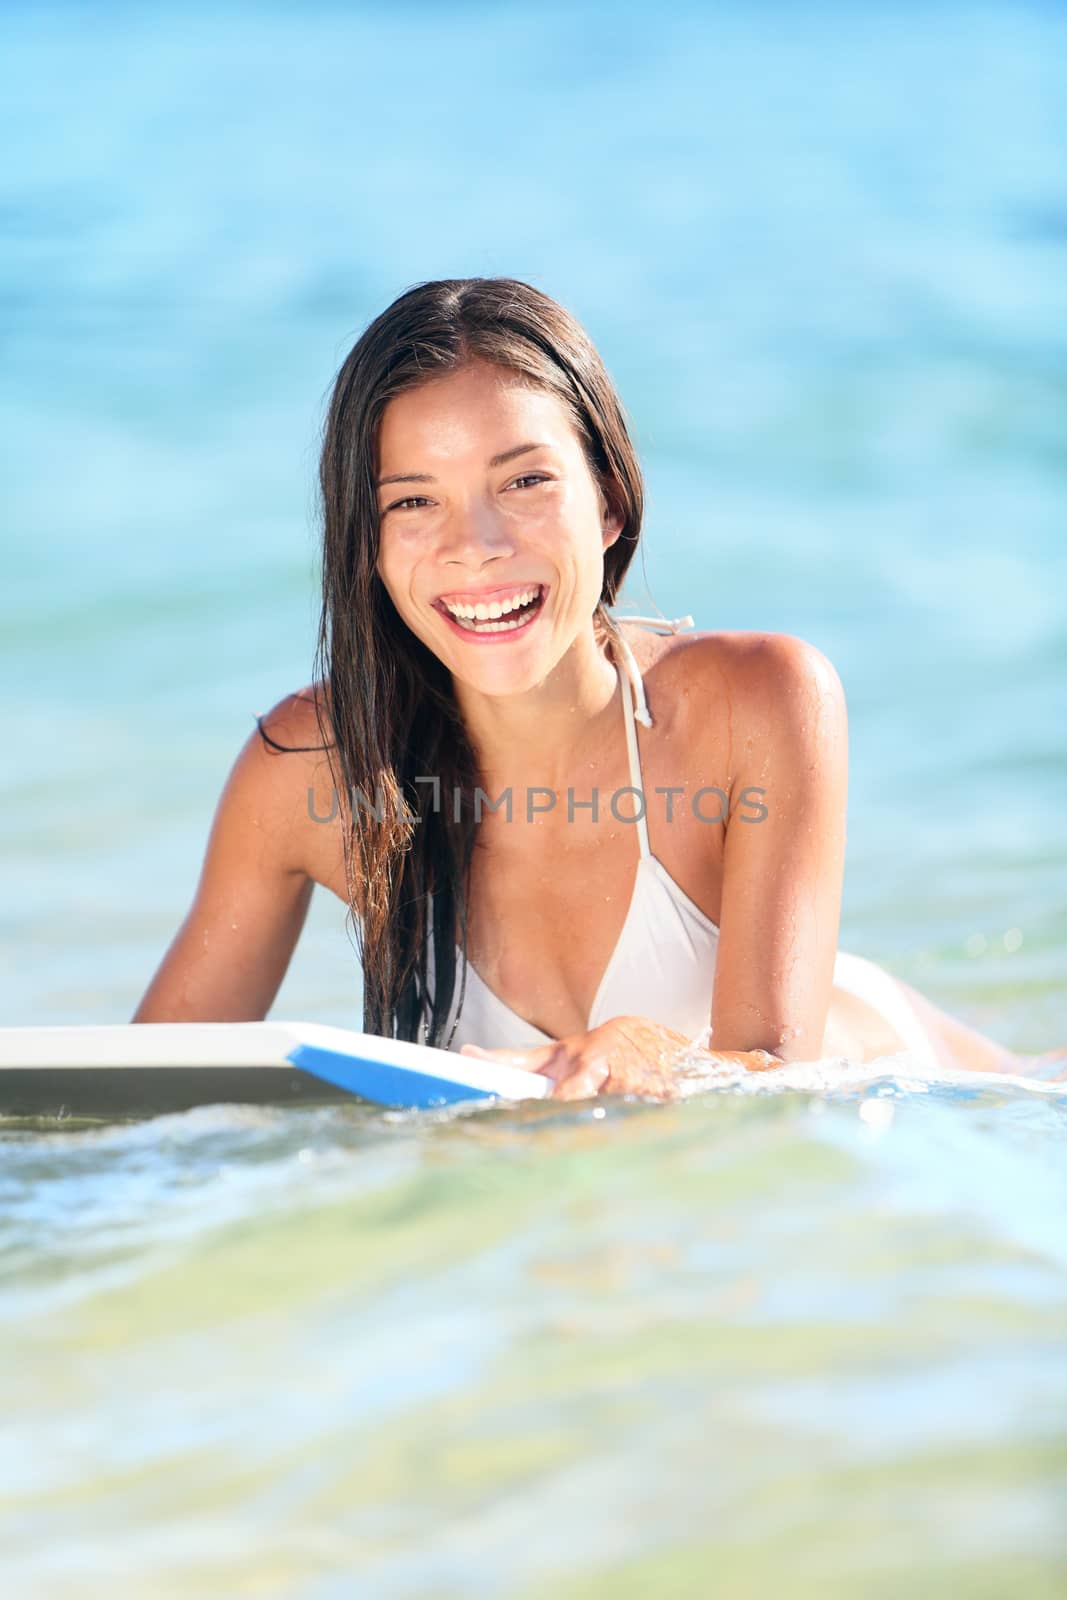 Surfboard woman smiling playing in the ocean by Maridav